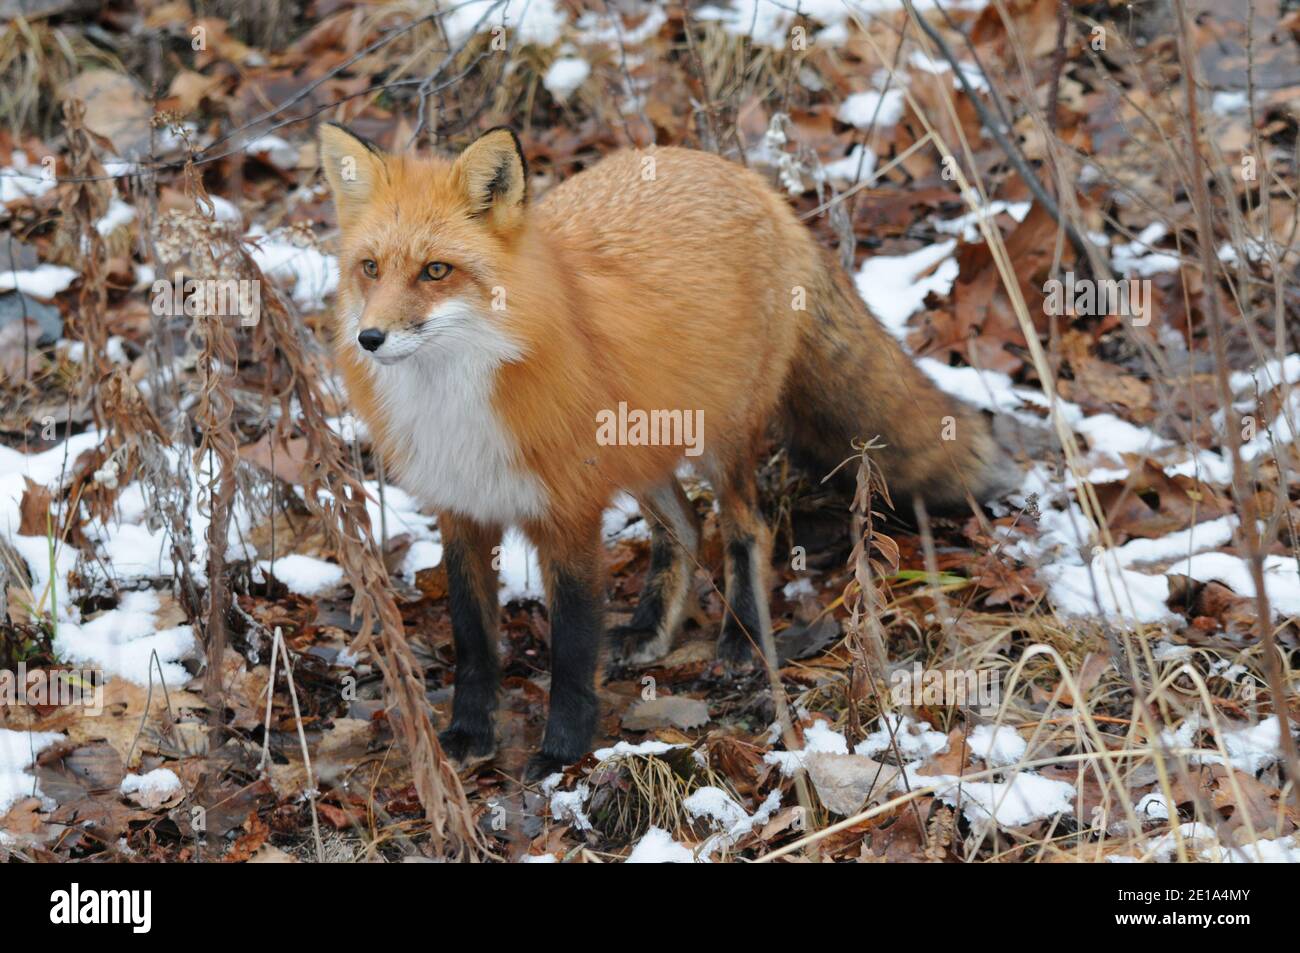 Red fox close-up profile view in the winter season with brown leaves and snow background in its environment and habitat. Fox Image. Picture. Portrait. Stock Photo